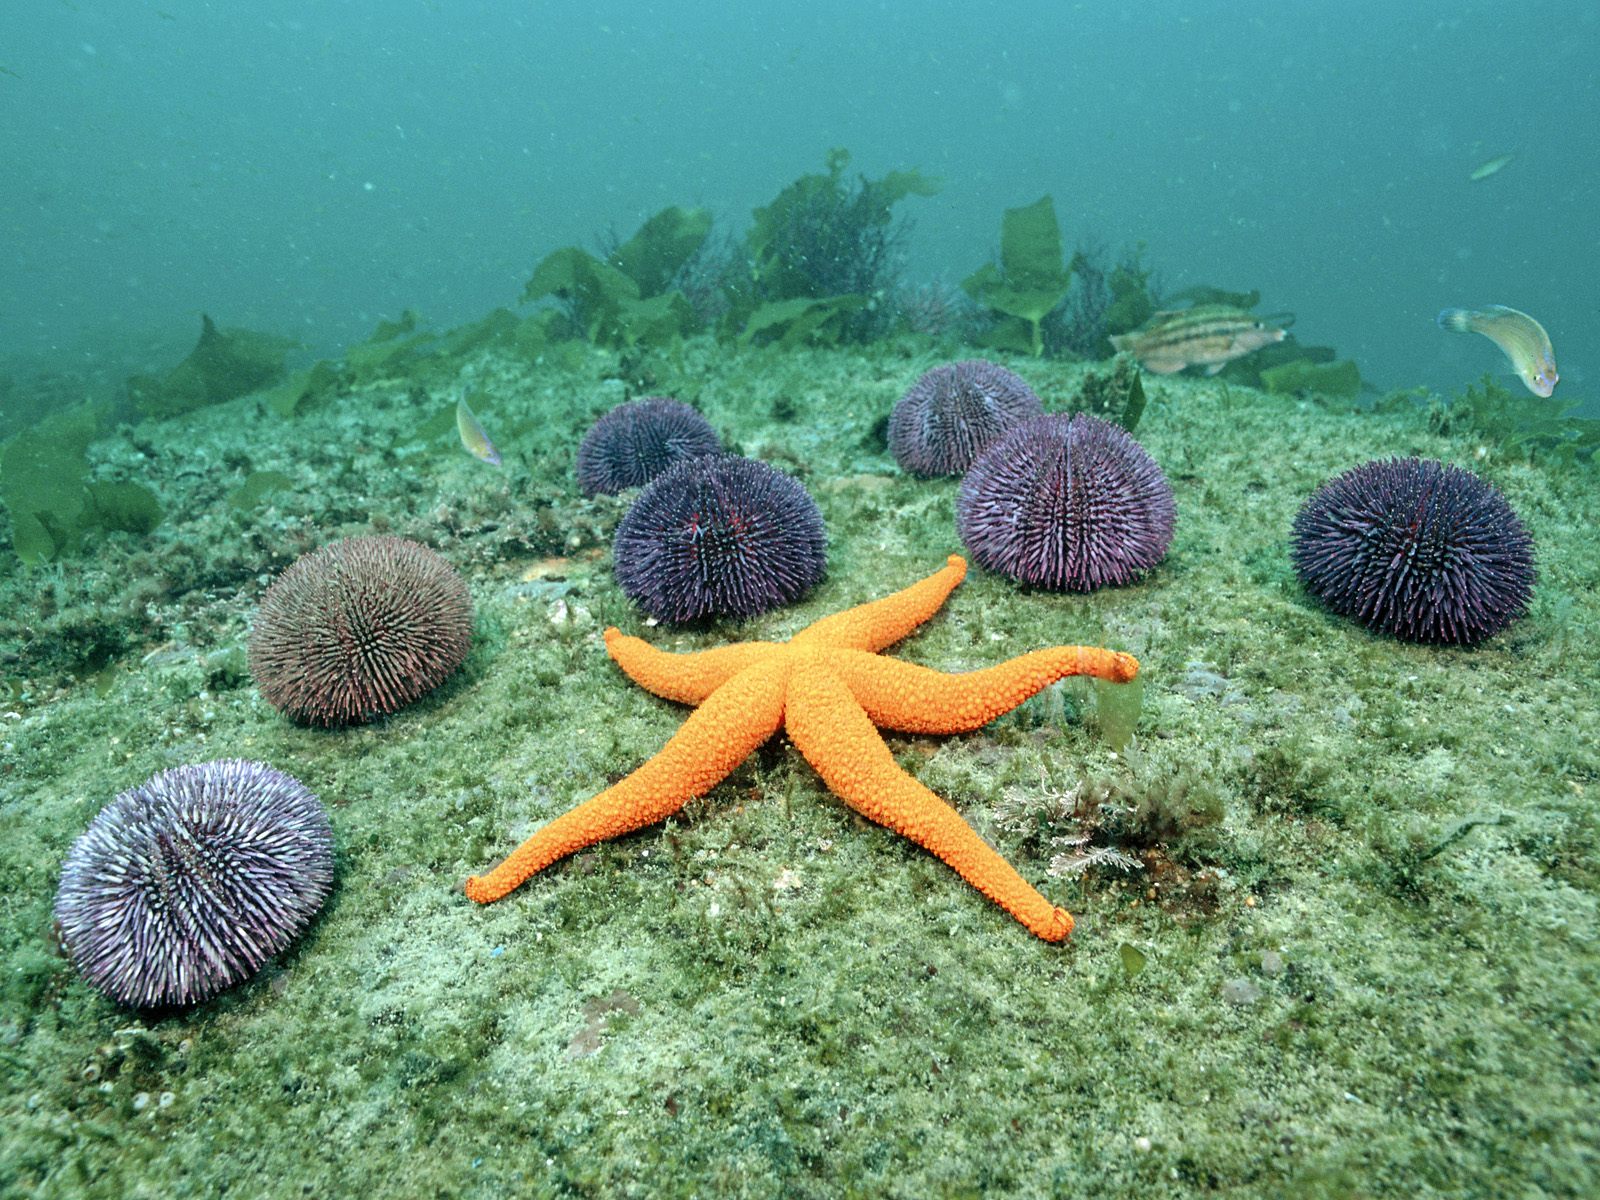 How do echinoderms eat?